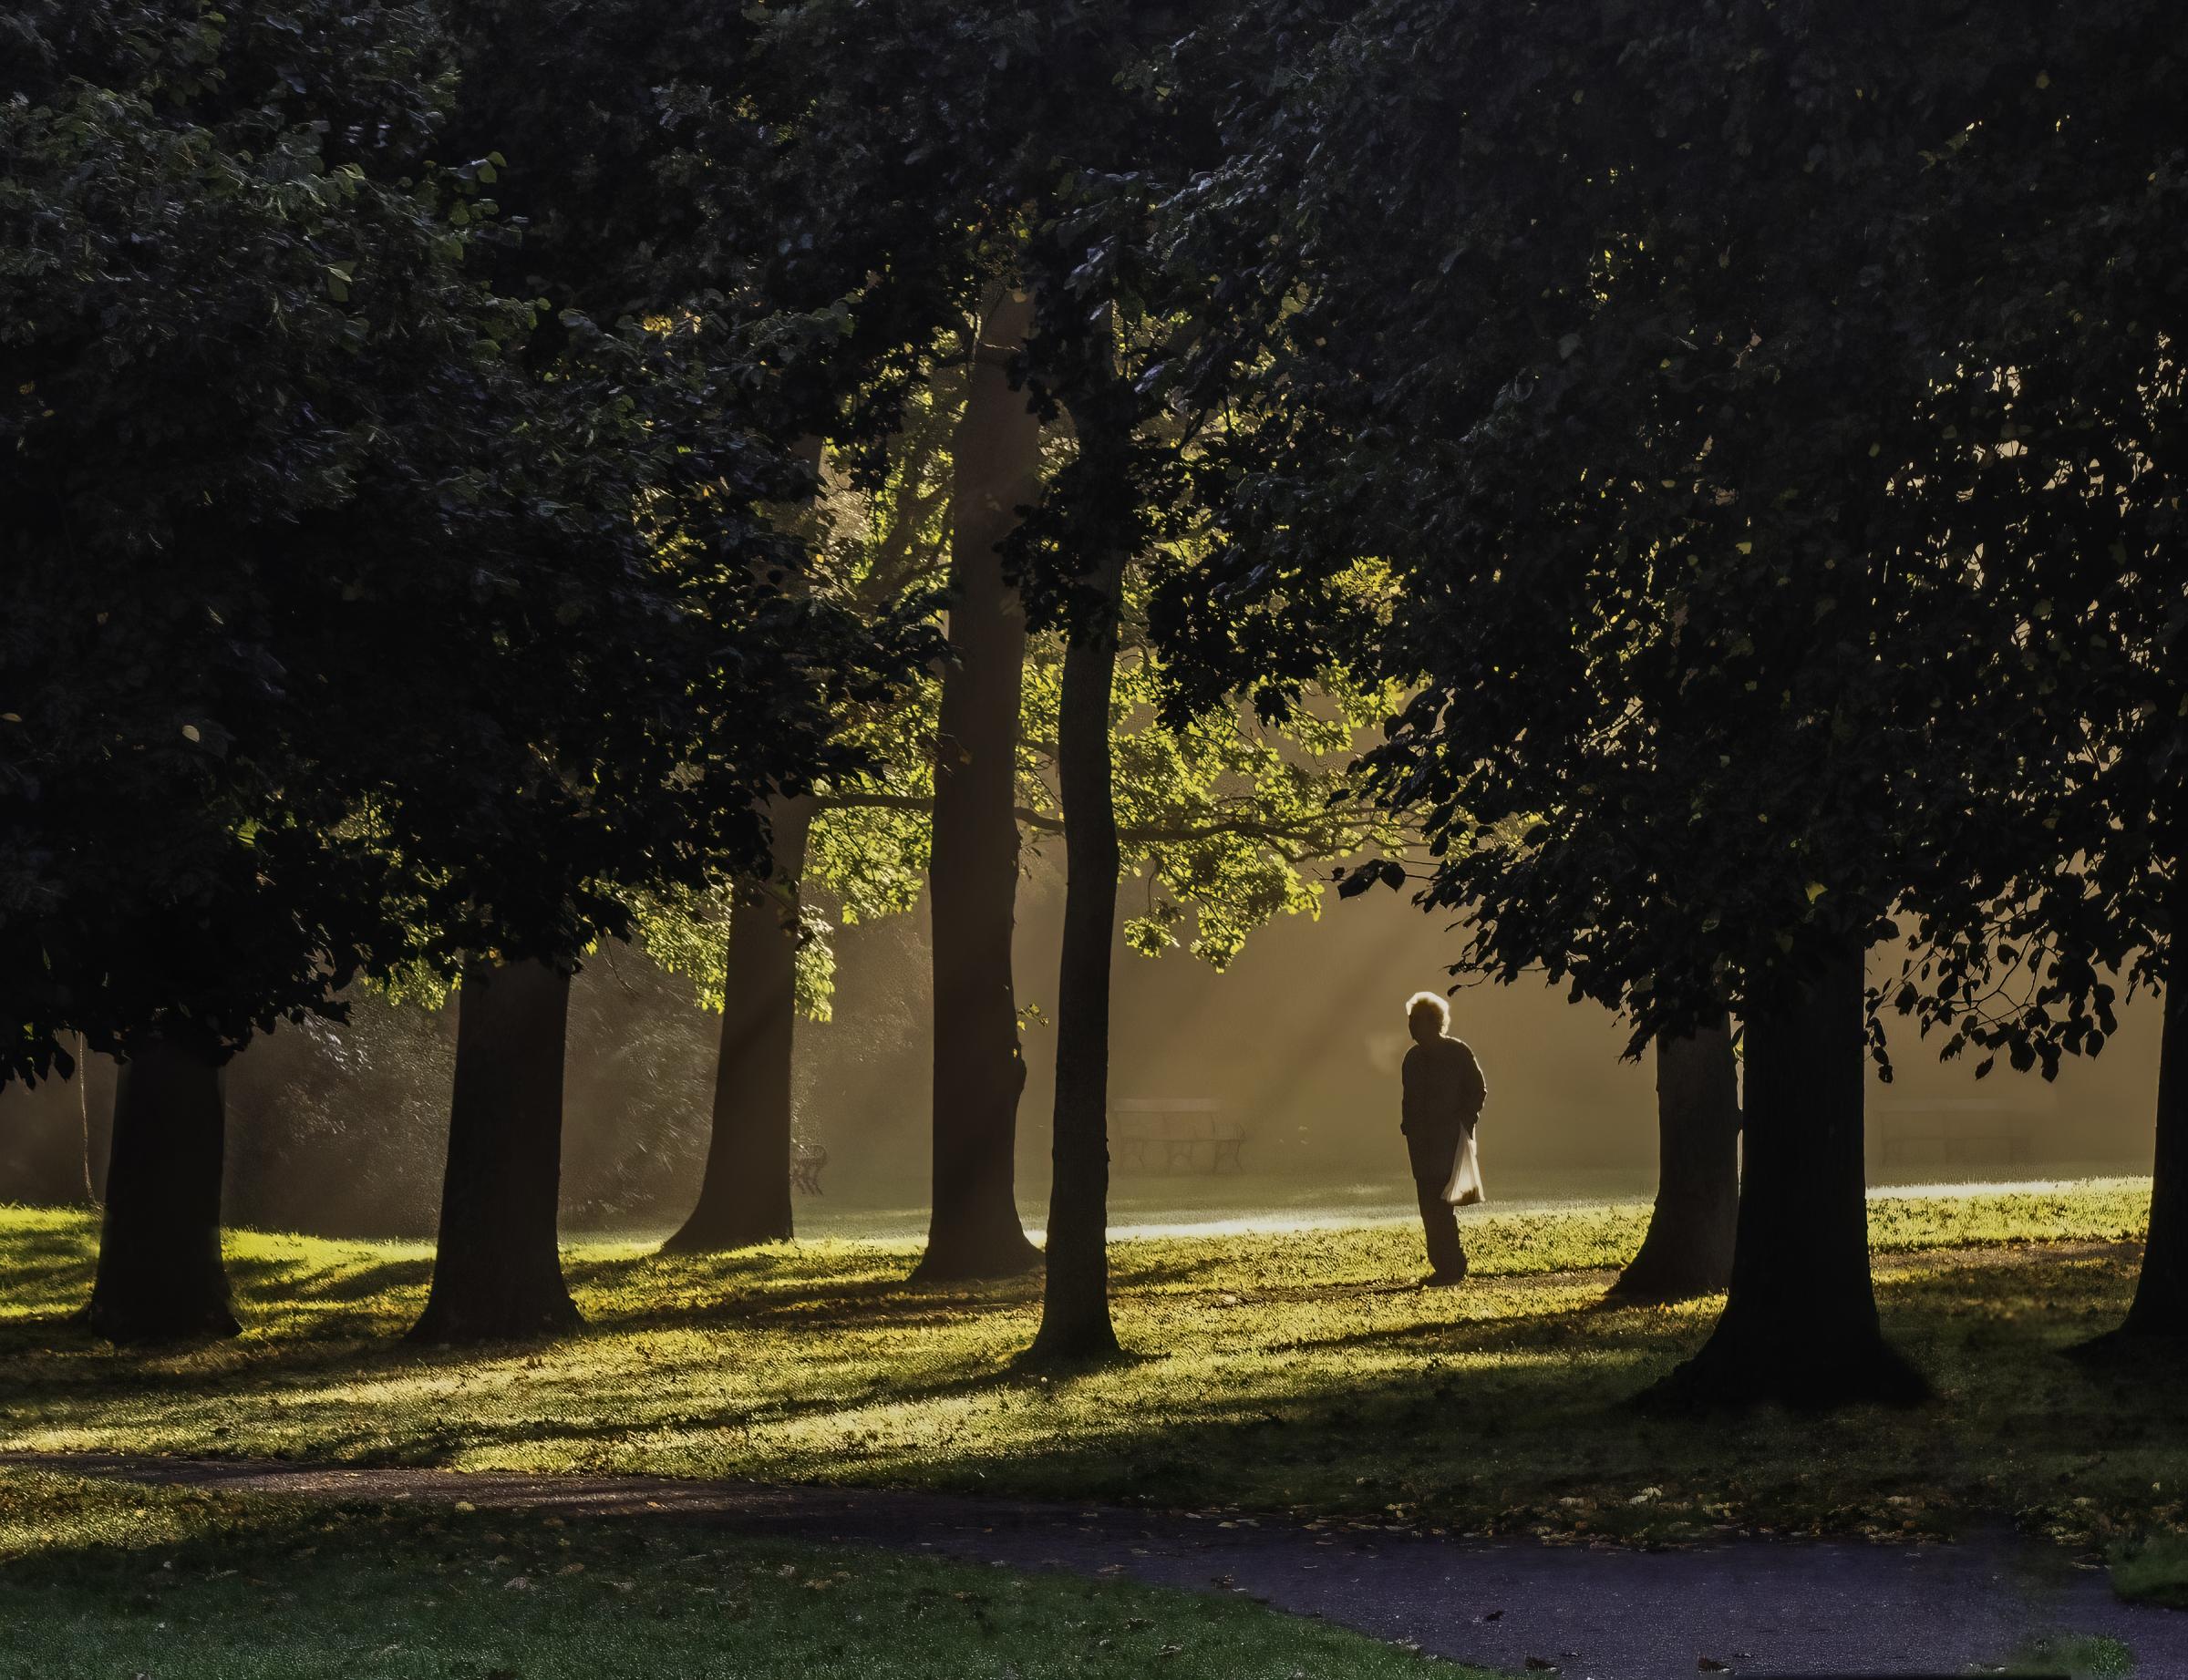 Ron was asked to supply the pictures for this year’s Birkenhead Park Calendar. This image was taken on an early morning walk in the park